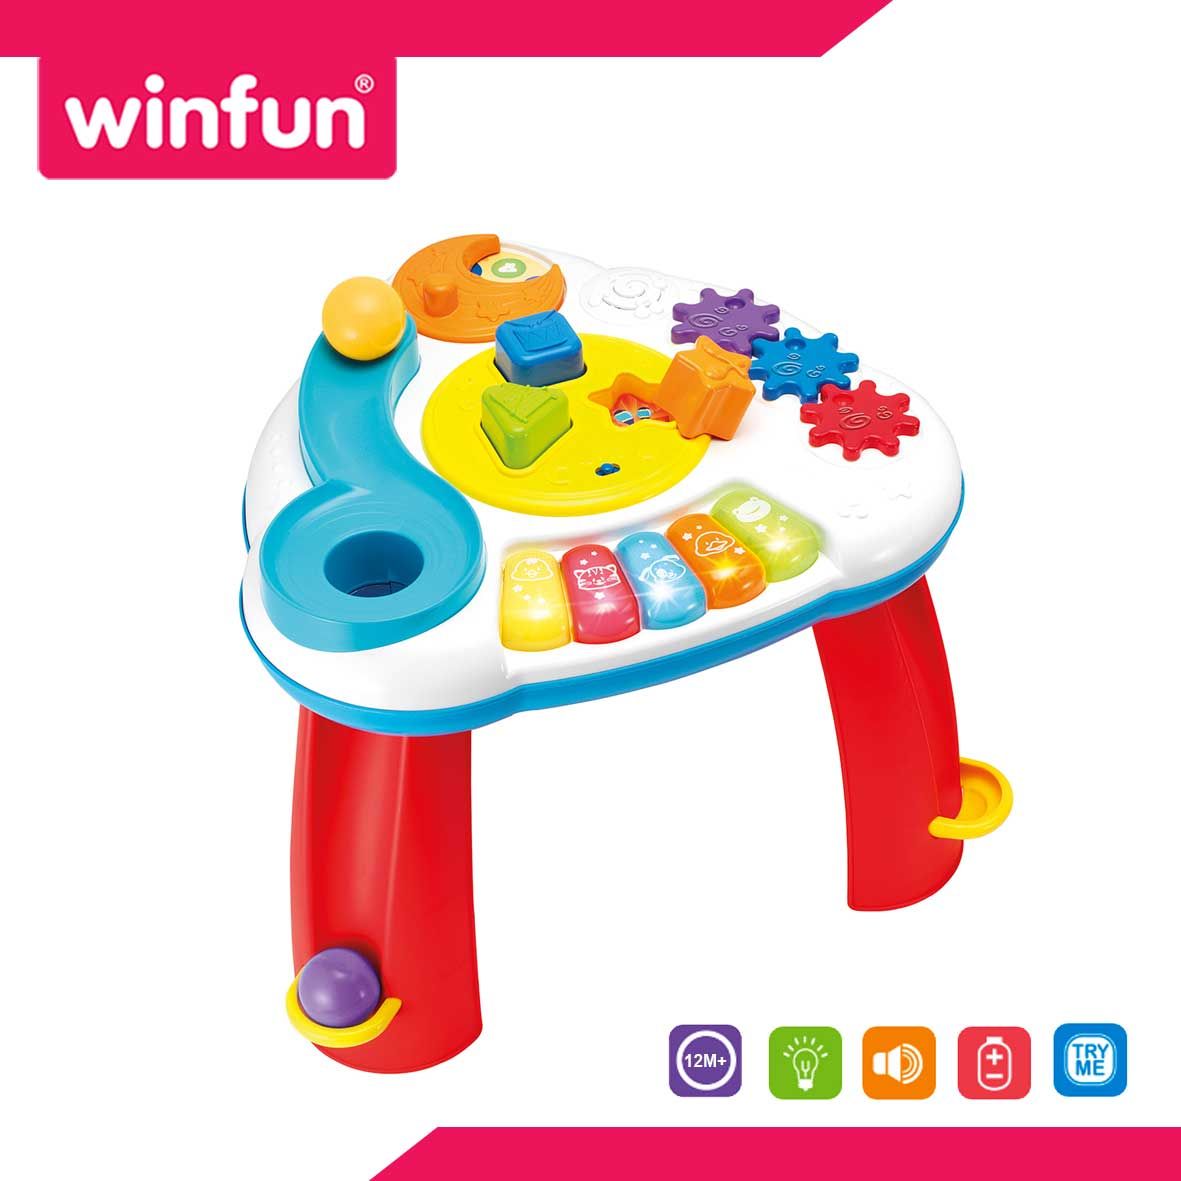 Winfun Ball 'n Shapes Musical Table - 2